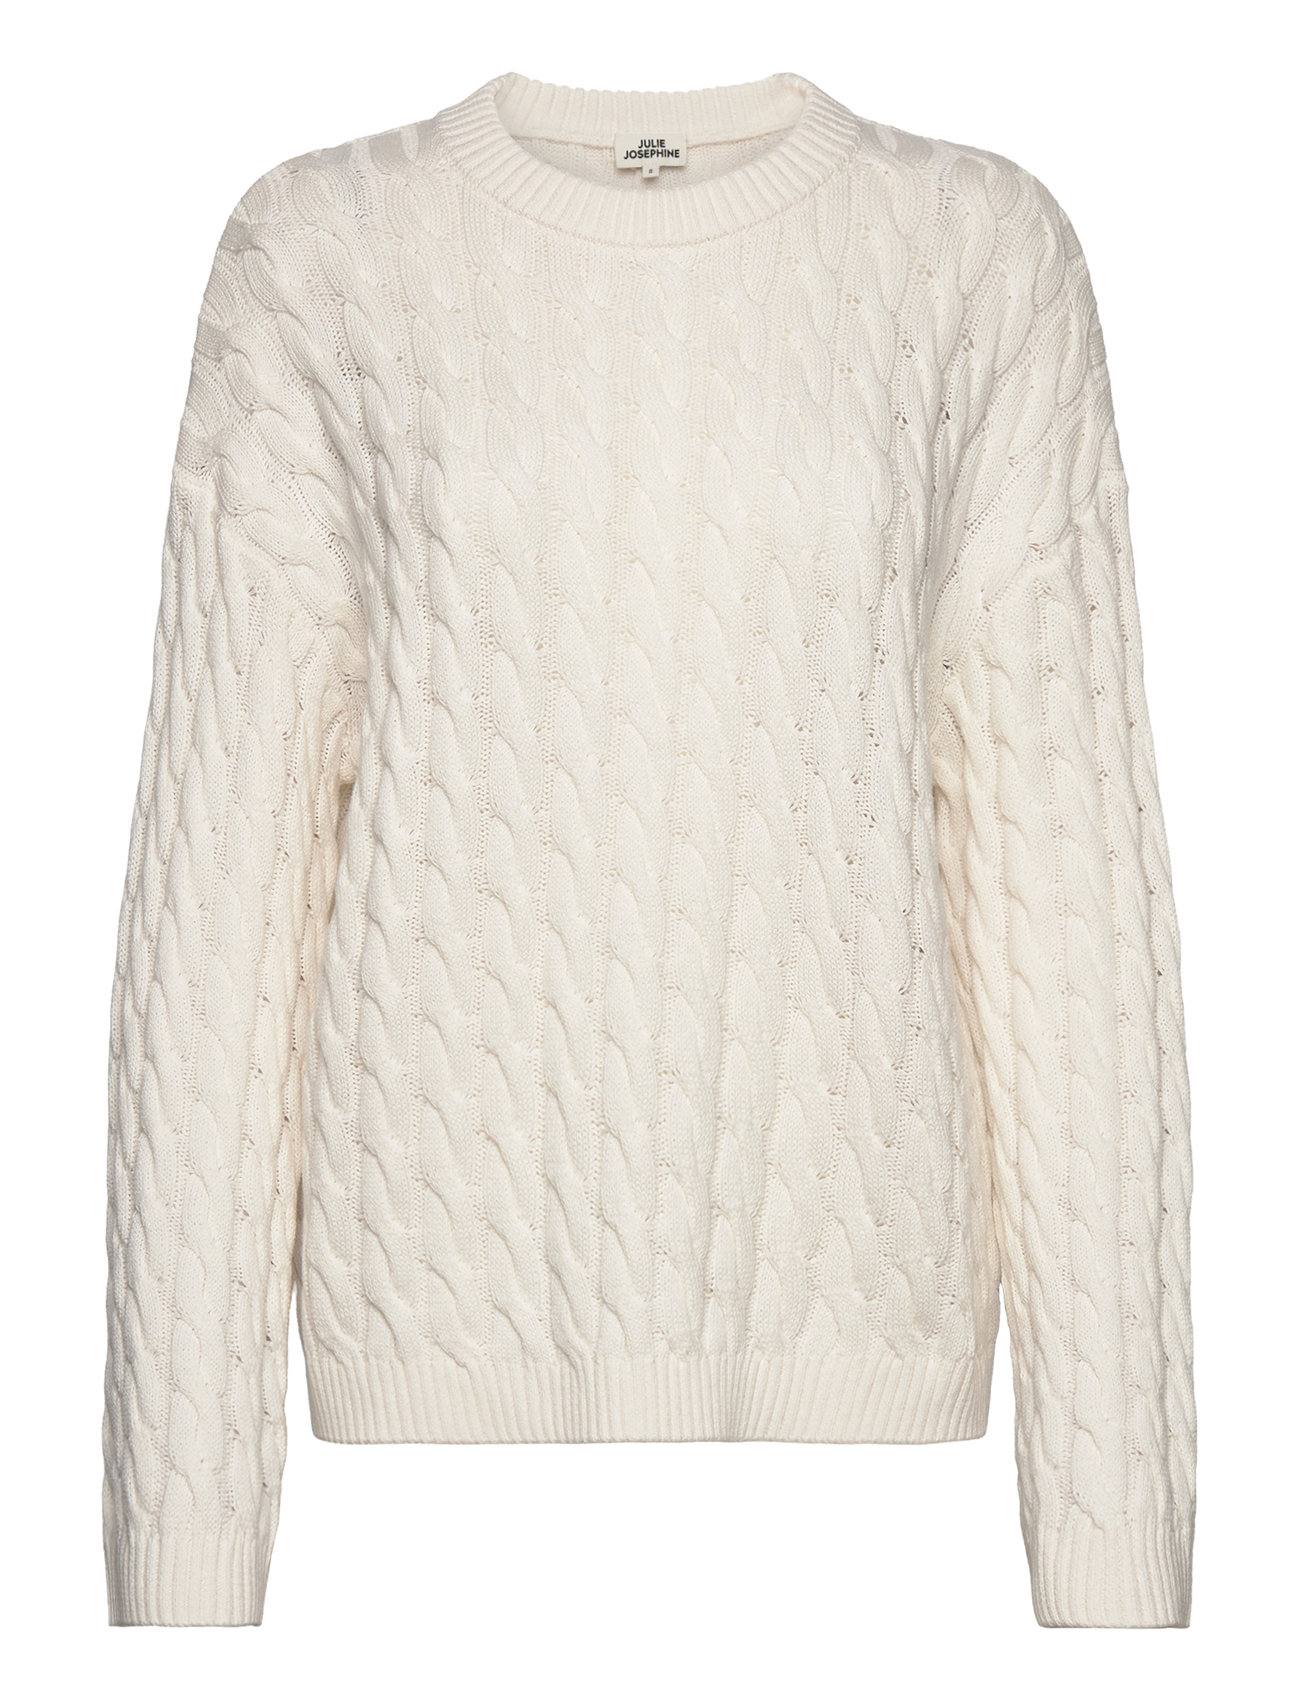 Cable Knit Sweater Designers Knitwear Jumpers White Julie Josephine